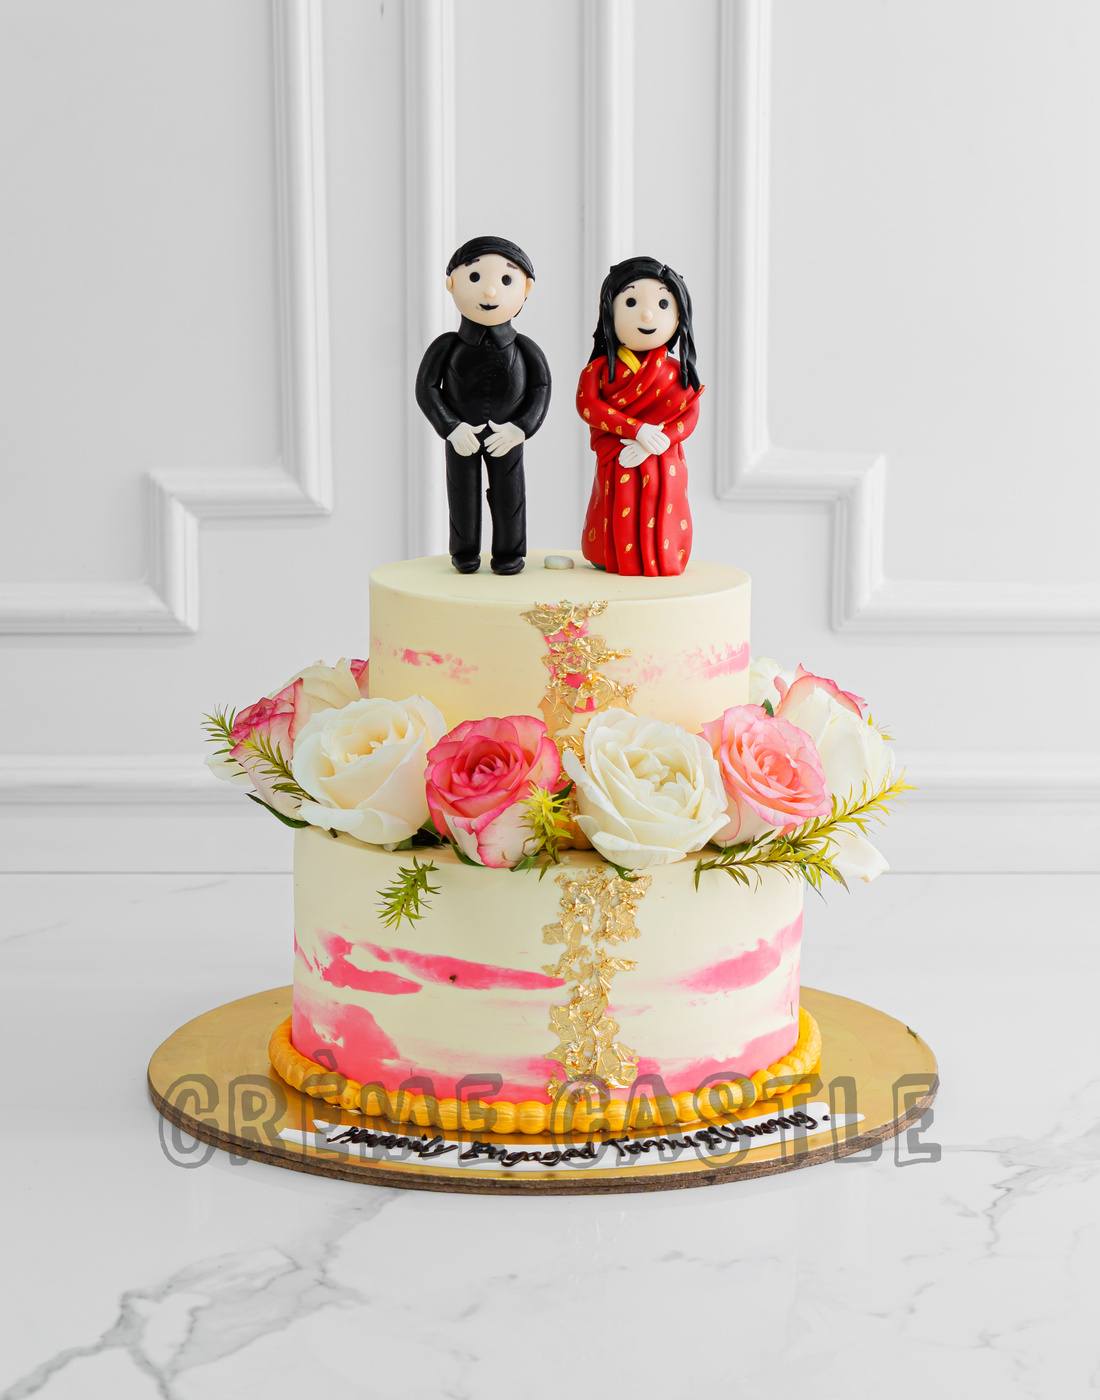 COUPLE IN LOVE CAKE #anniversary #cake #ideas #couple The Most Meaningful  Anniversary Cakes - Great Ideas for yo… | Aniversary cakes, Anniversary cake  designs, Cake